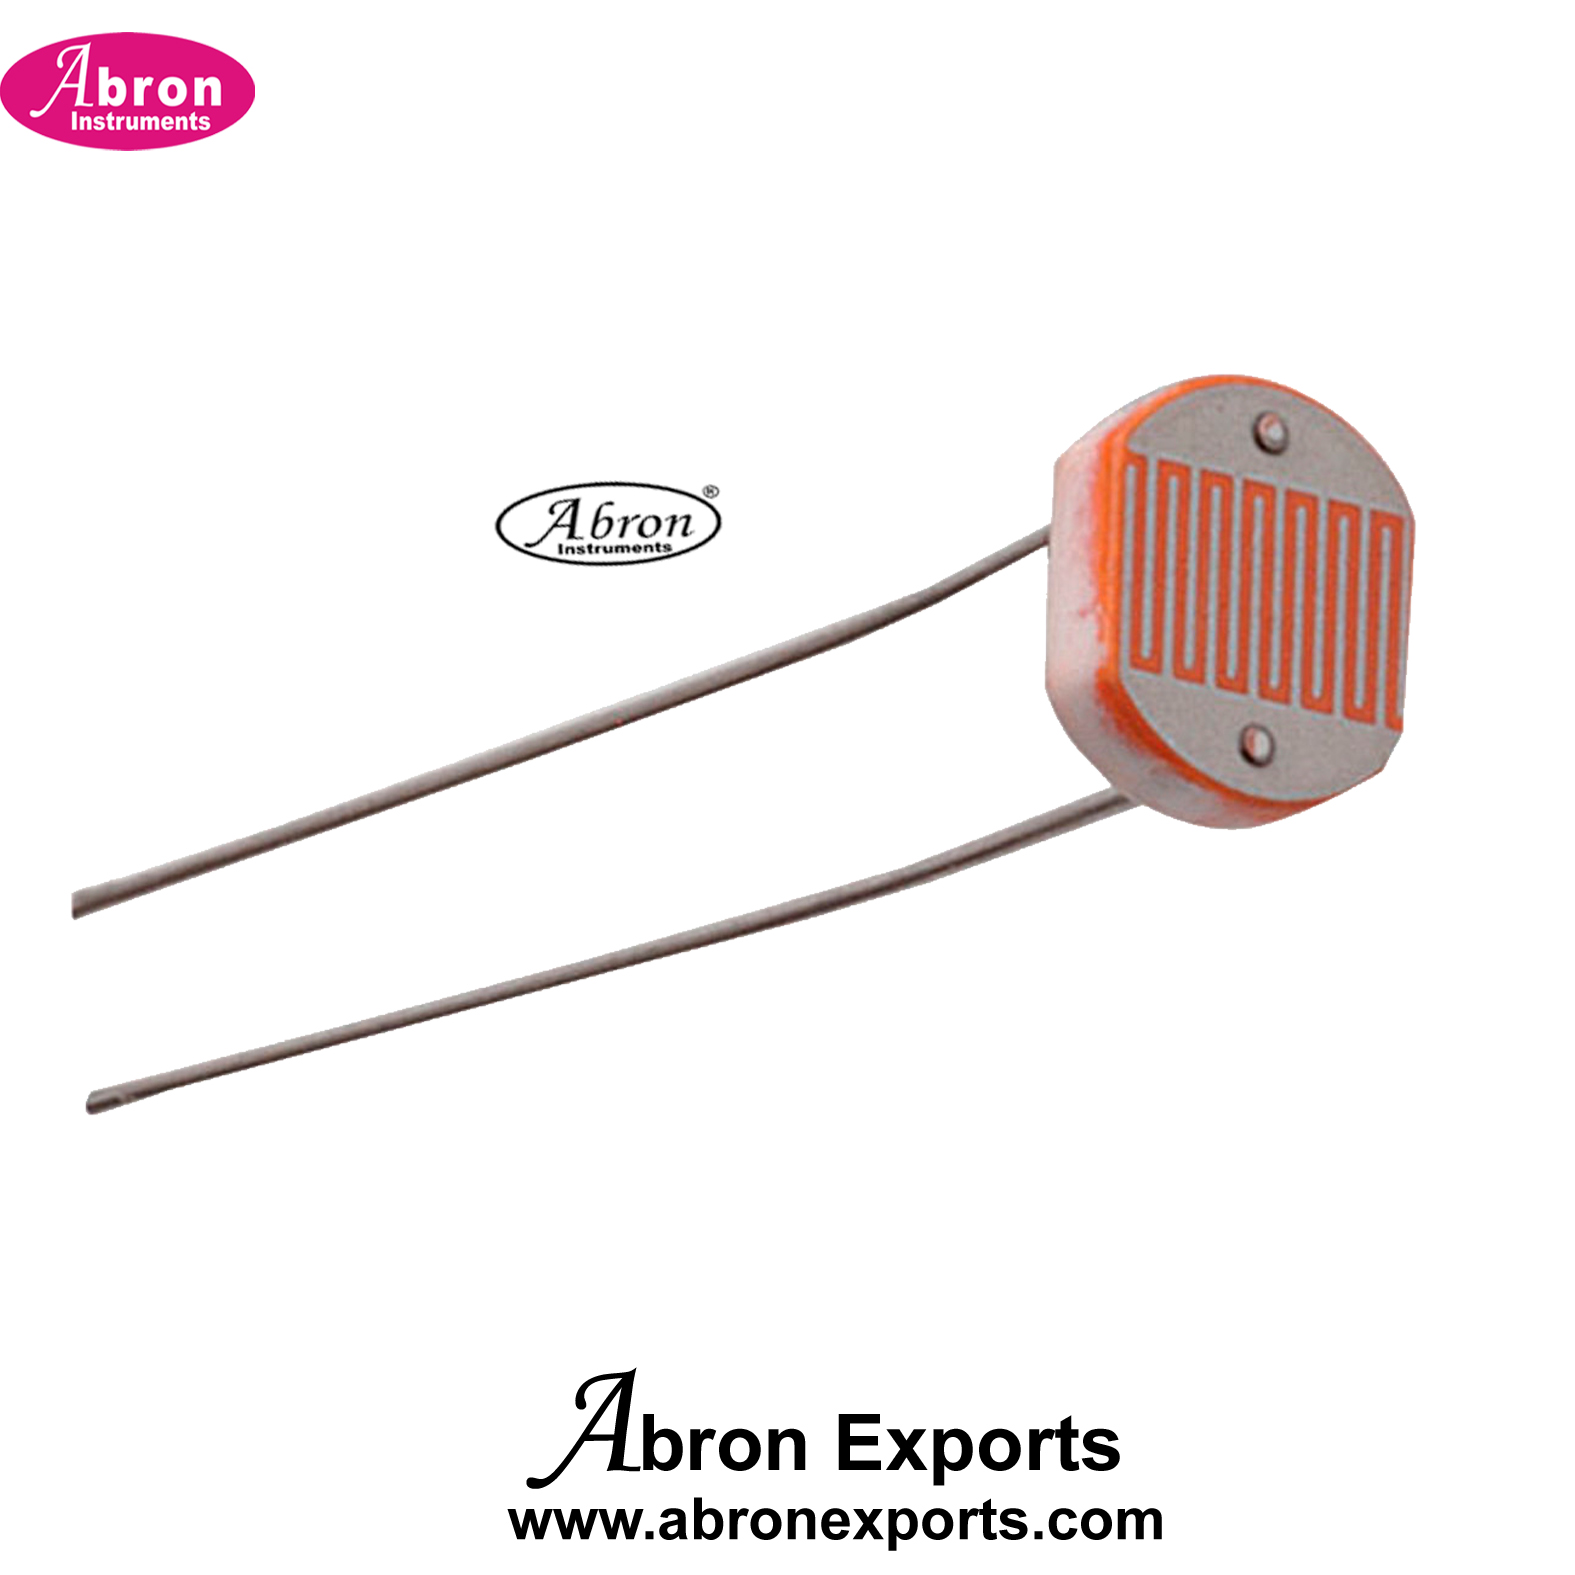 Circuit Board Parts Sensor LDR Light Dependent Resistance Loose Pack of 10Pc Abron AE-1224LDR10 